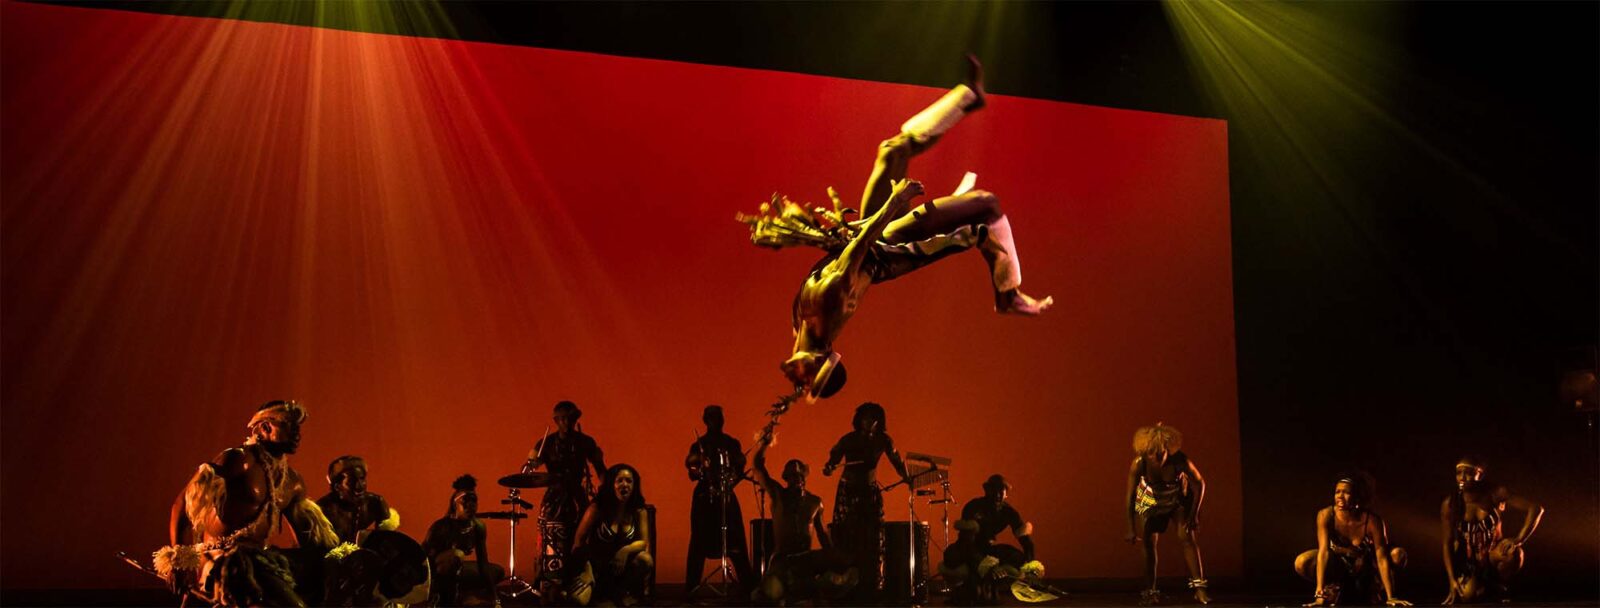 dancer flying through the air, red background